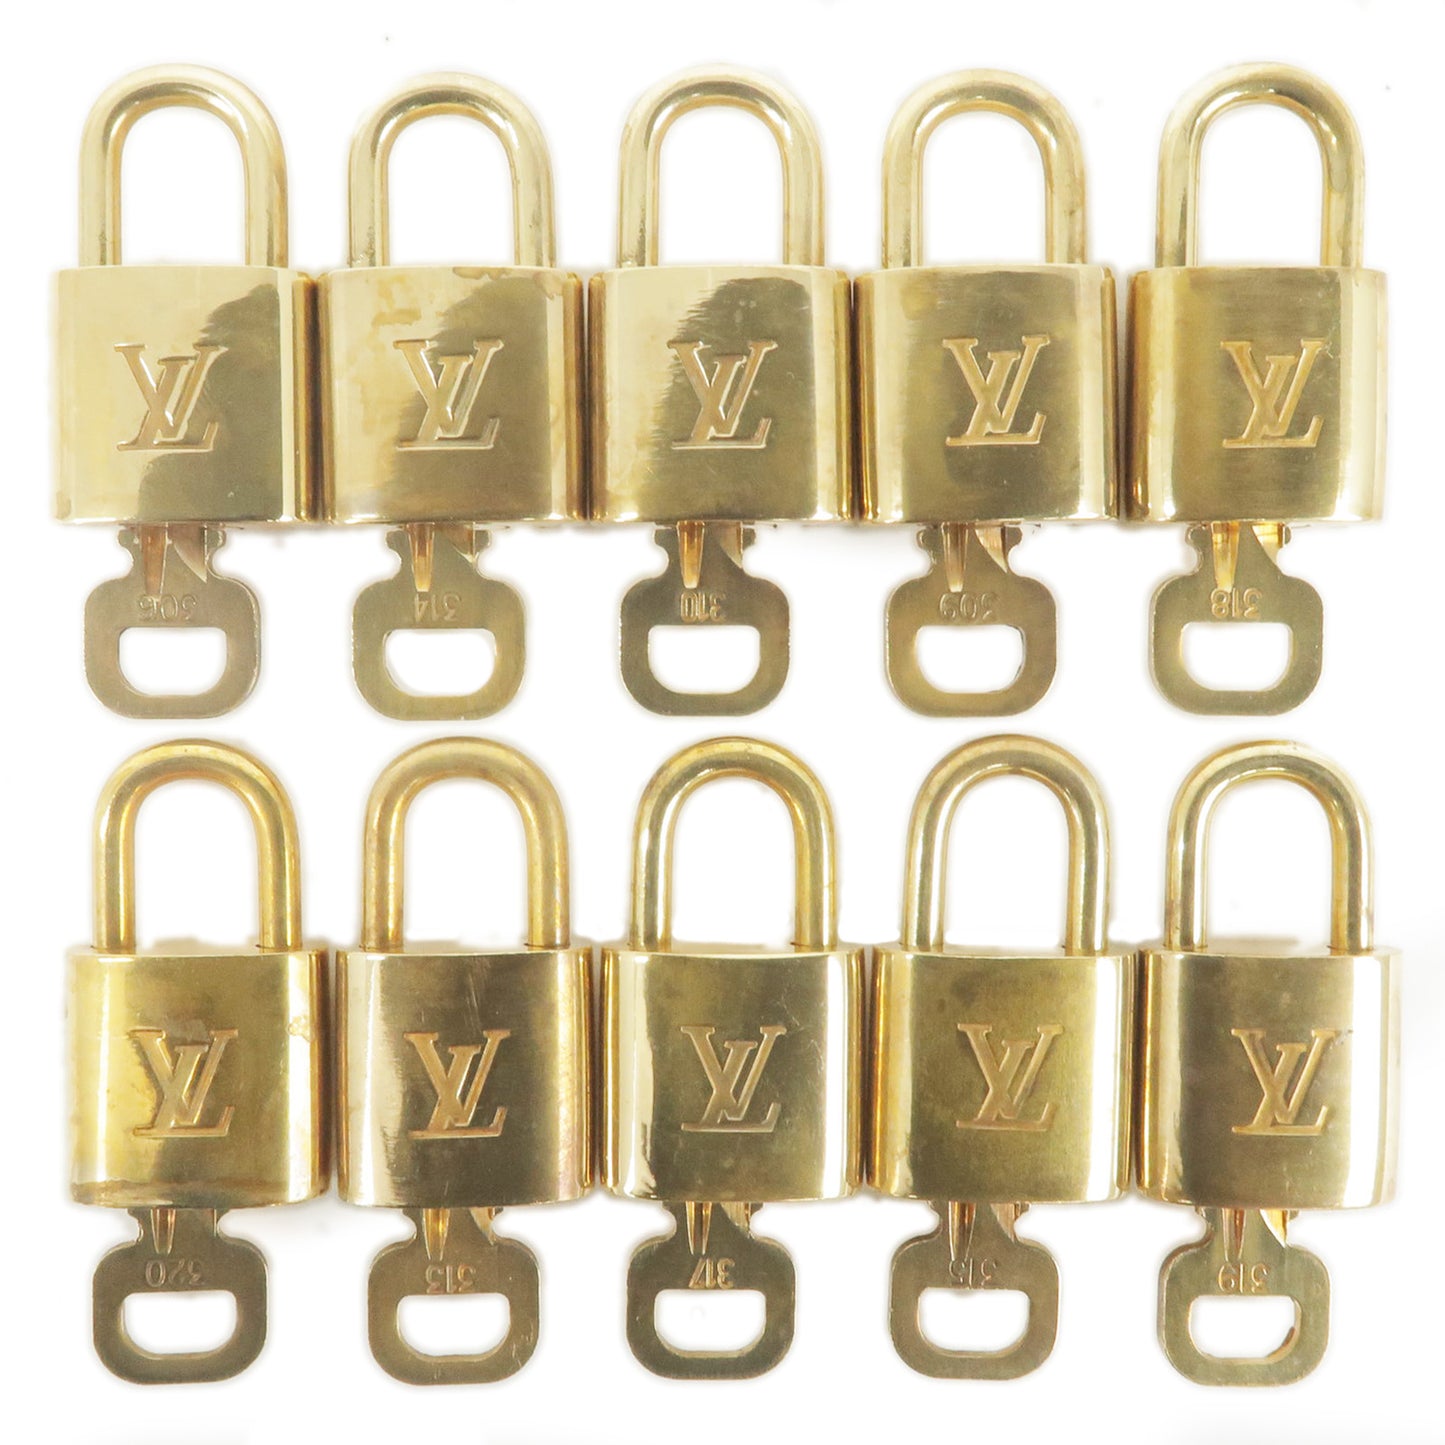 Authentic Louis Vuitton Gold Brass Lock and Key Set 310 